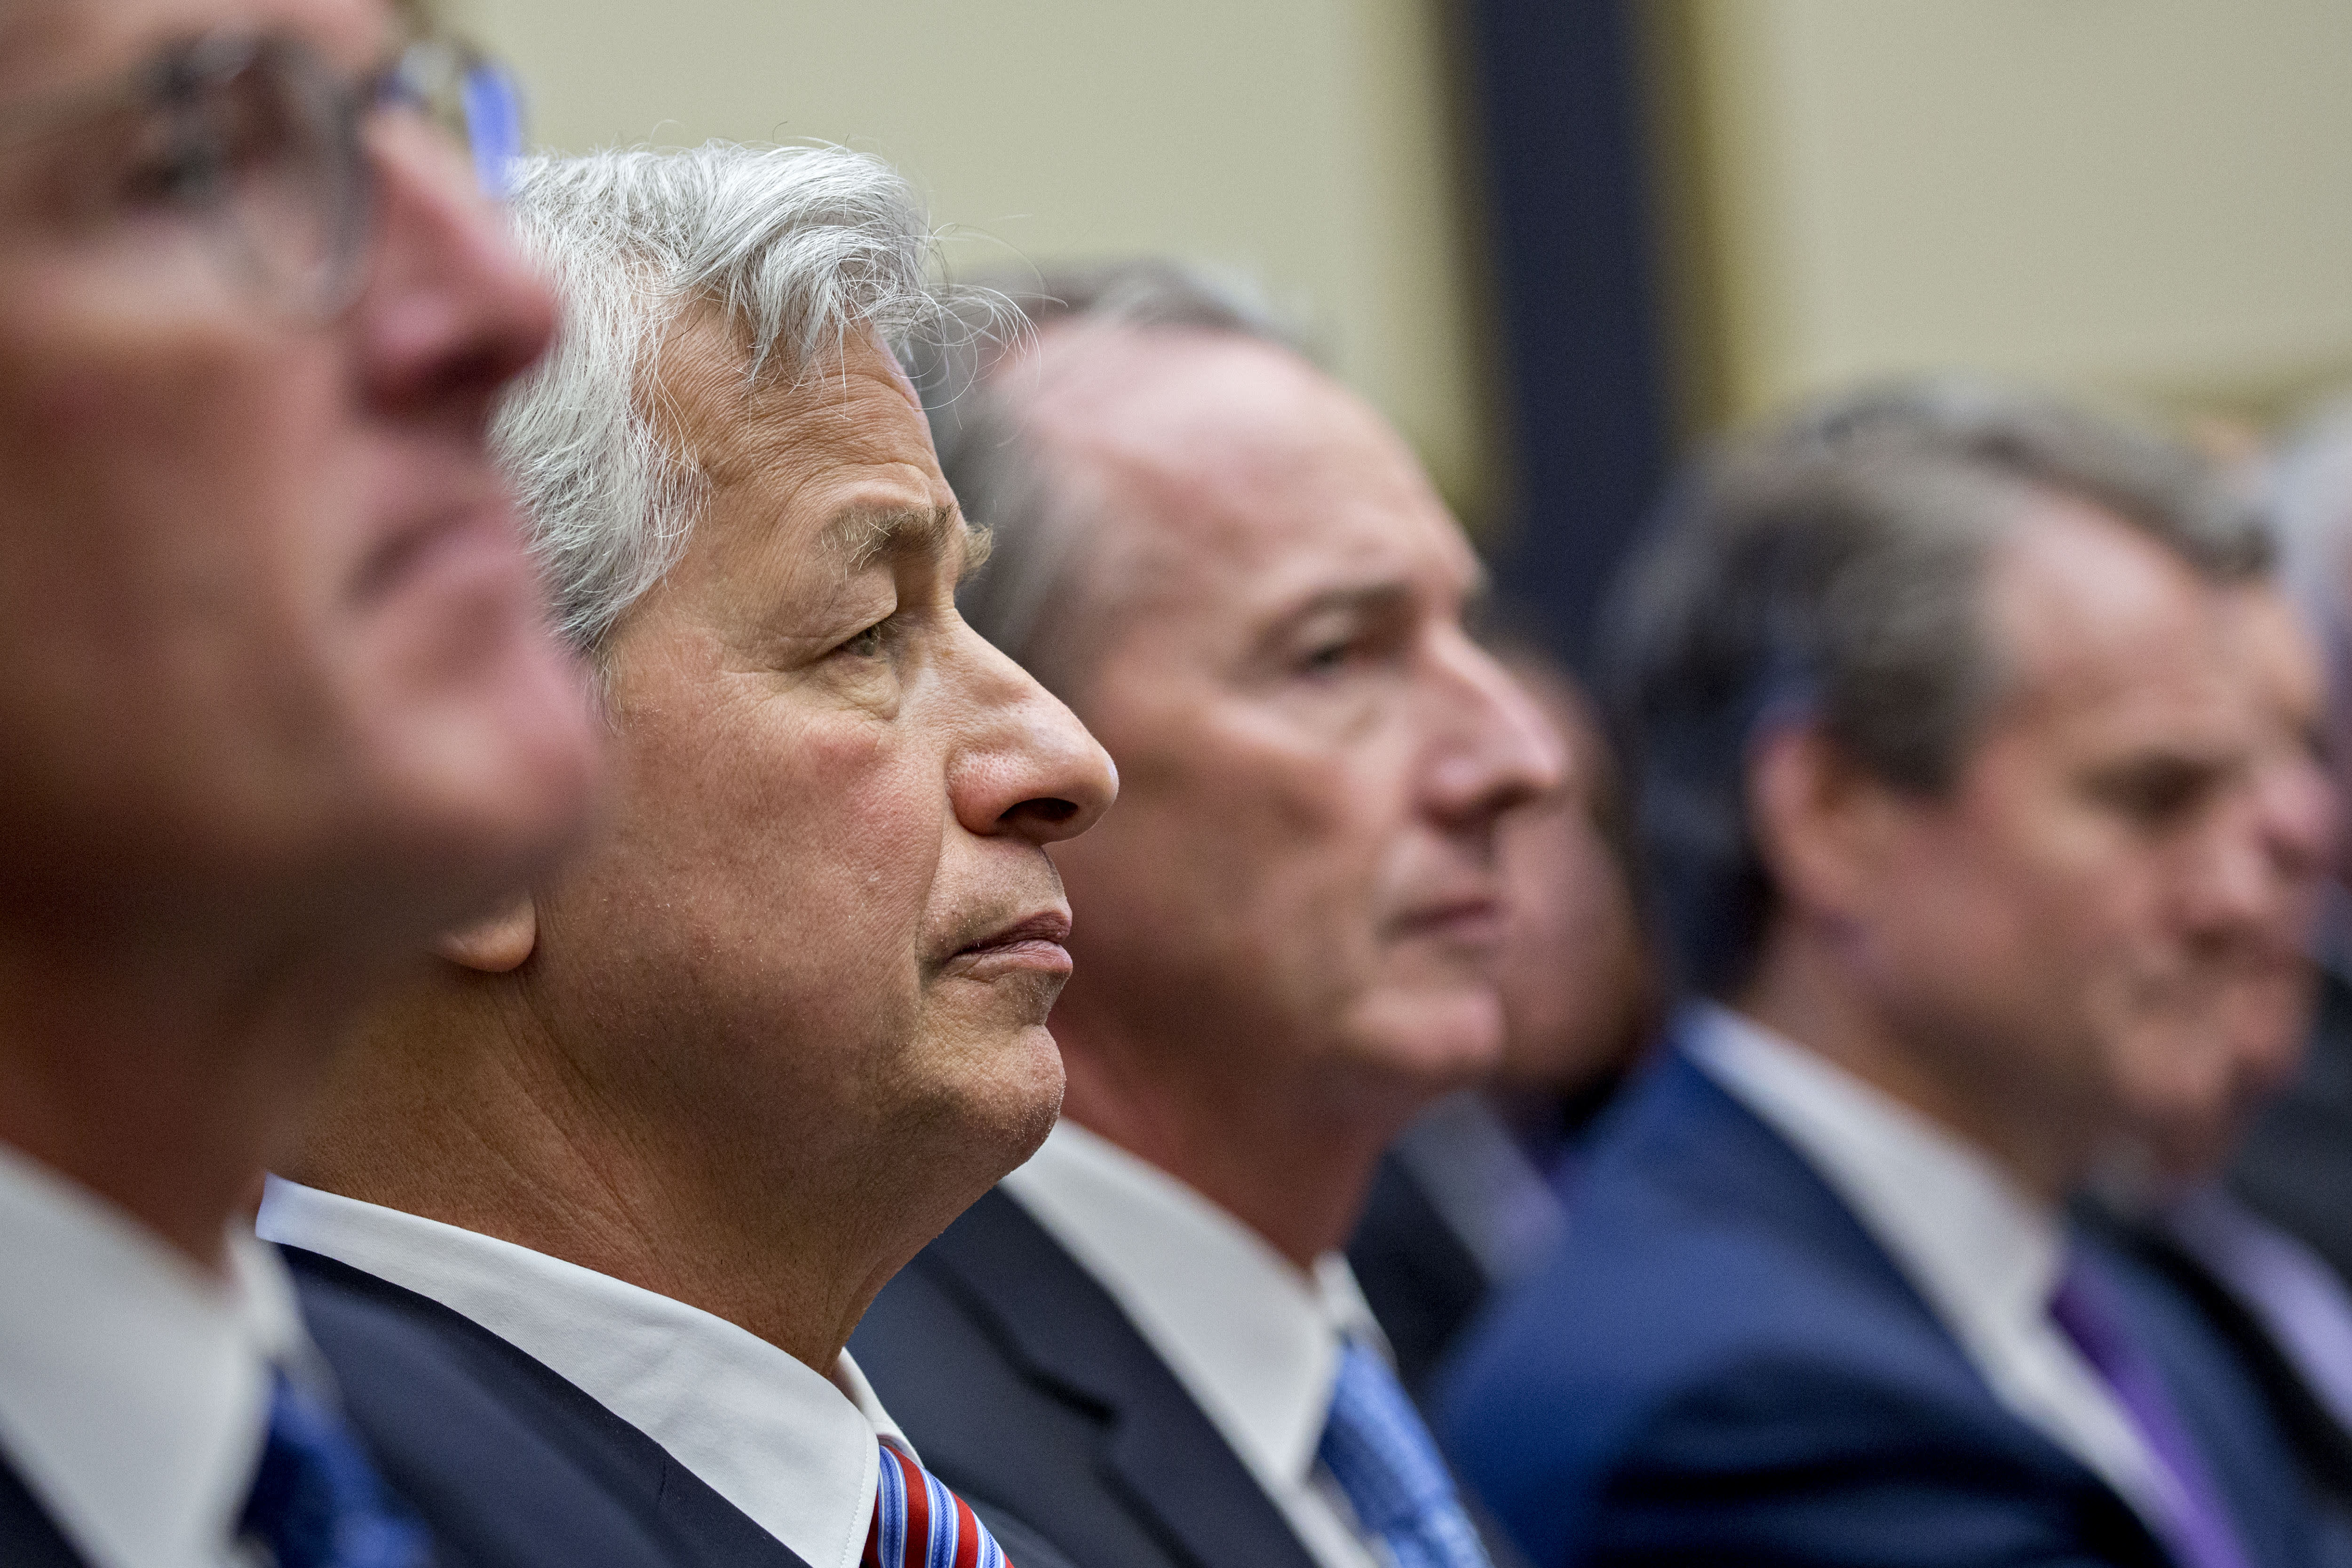 JPMorgan and Citigroup join US corporations in disrupting political donations